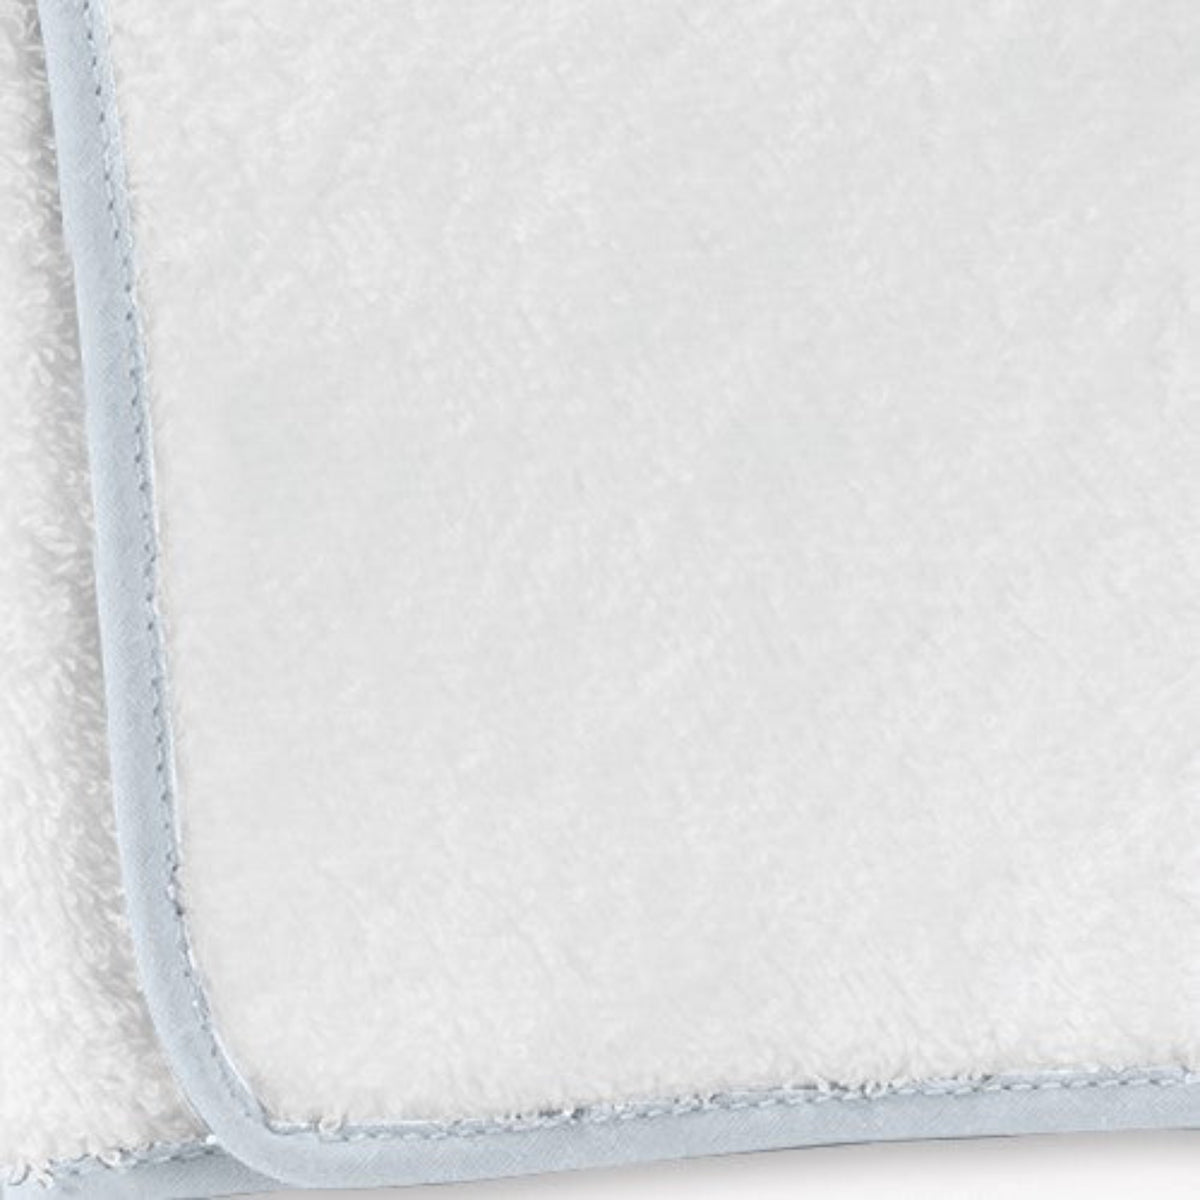 Sample Image of Matouk Cairo Bath Towels Swatch in White/Light Blue Color